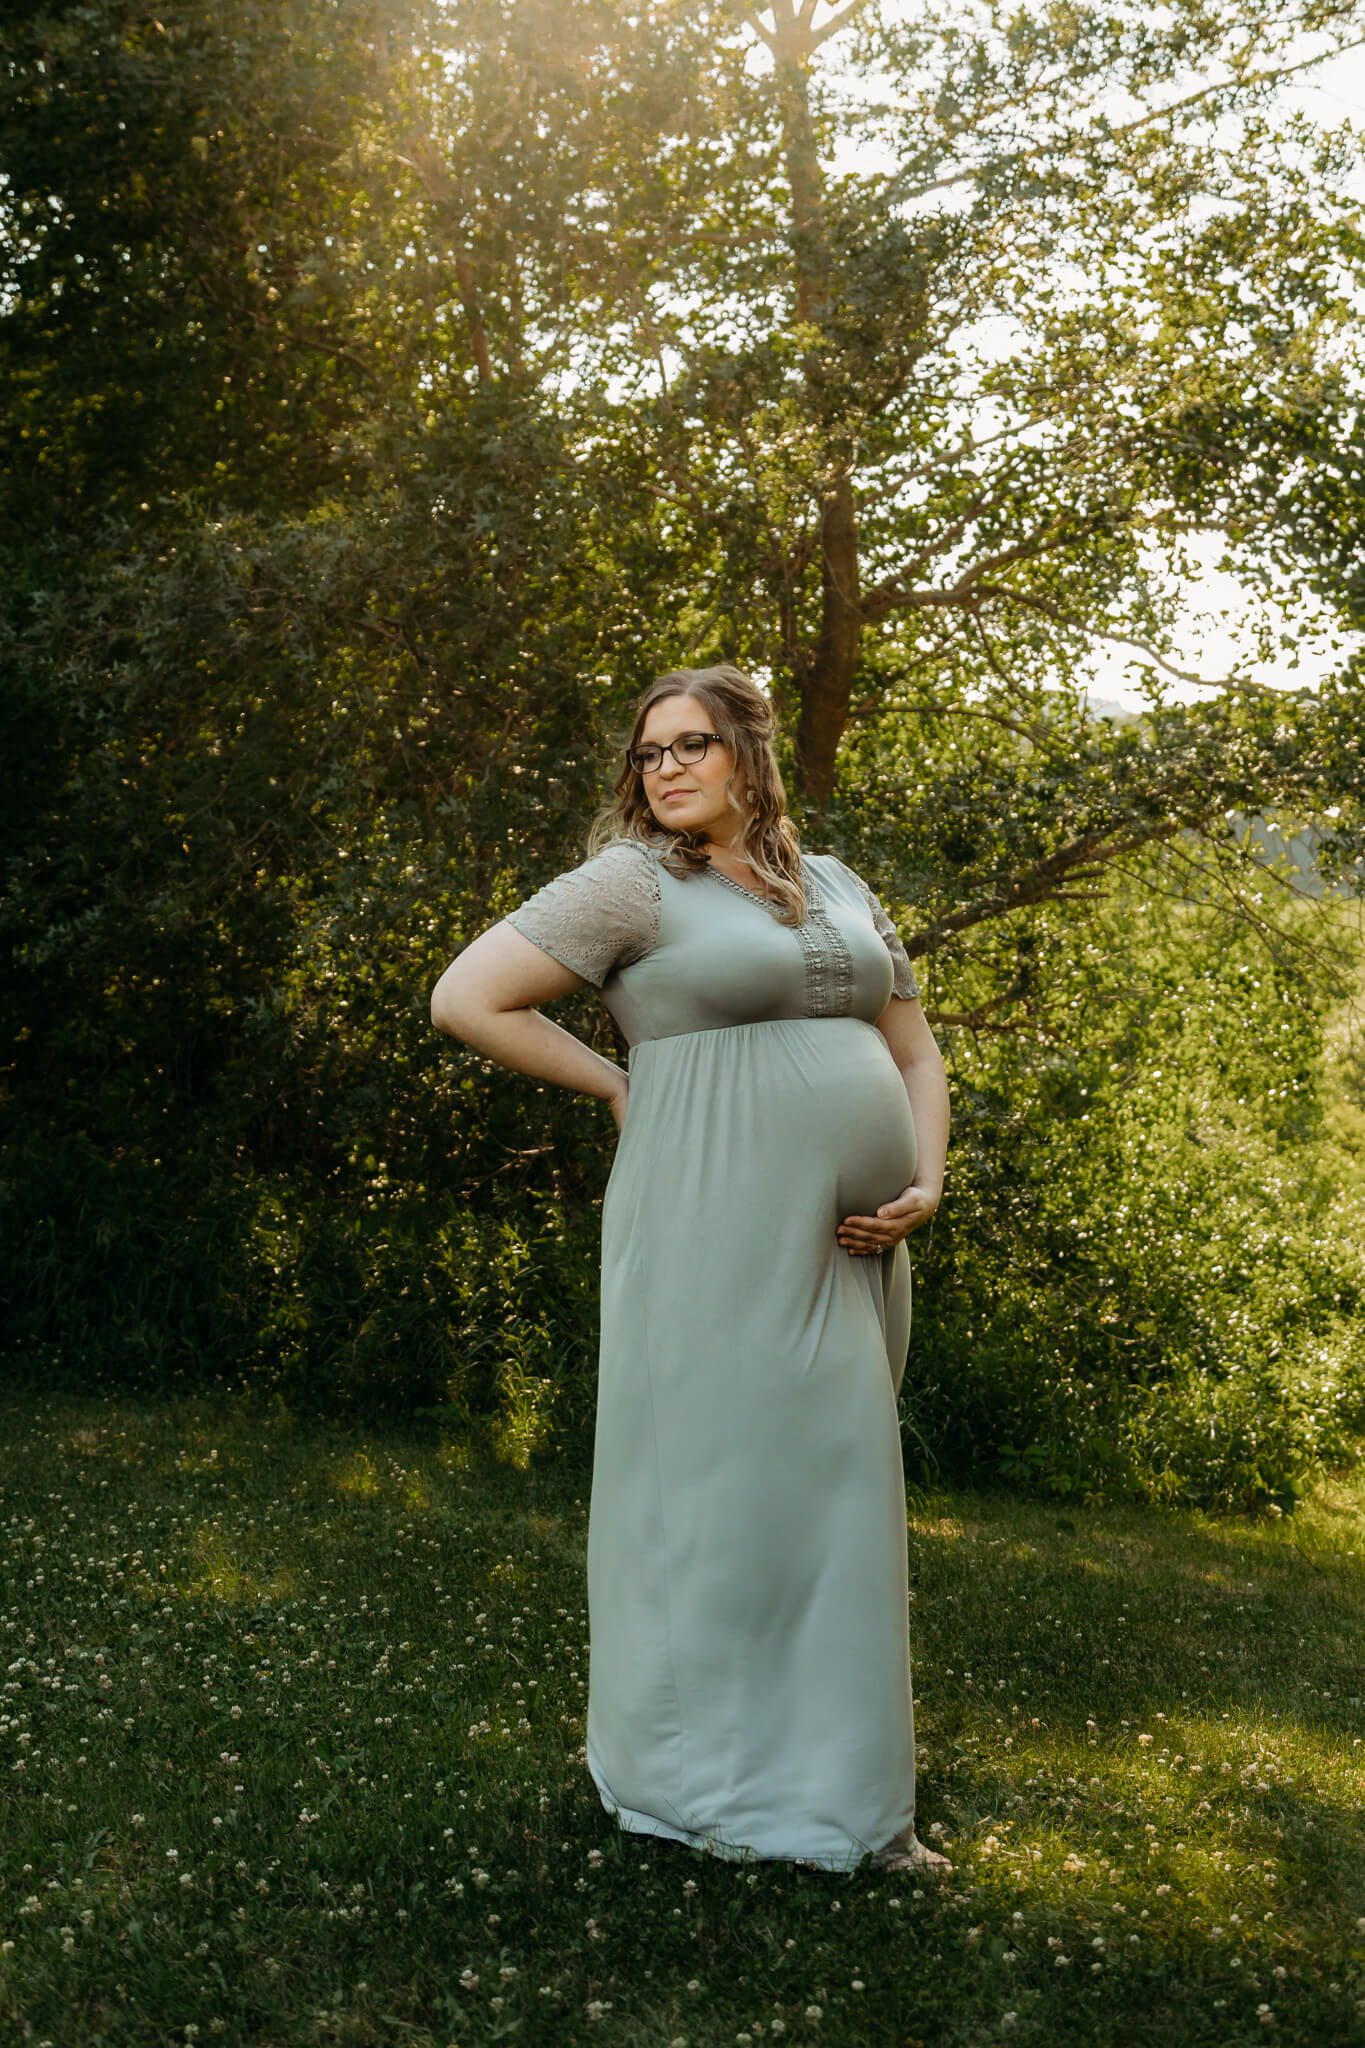 A mother to be in a green maternity gown stands in a forest field at sunset holding her bump